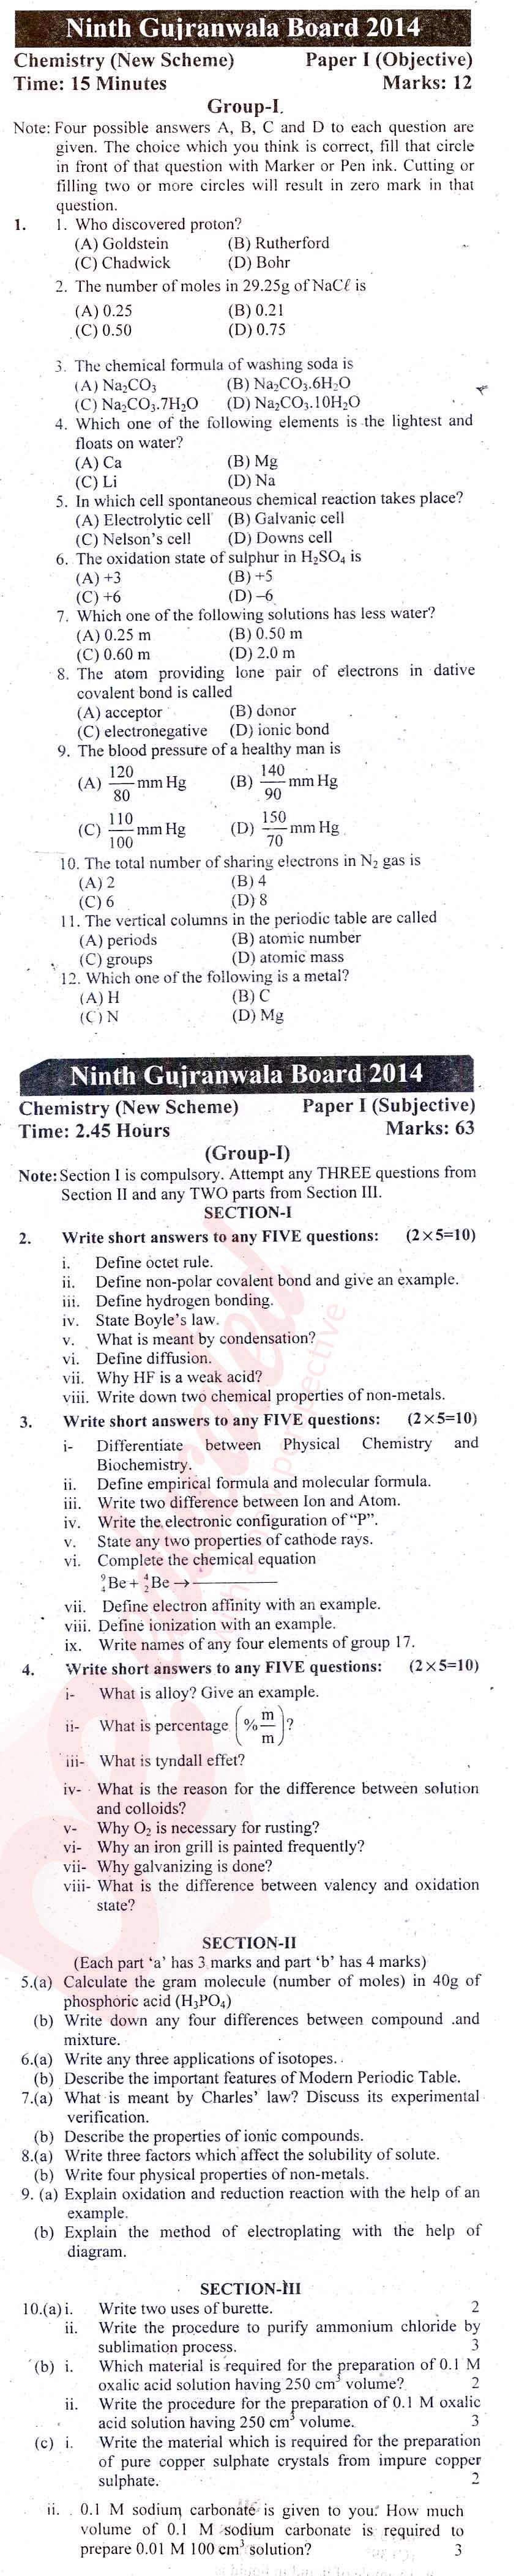 Chemistry 9th English Medium Past Paper Group 1 BISE Gujranwala 2014